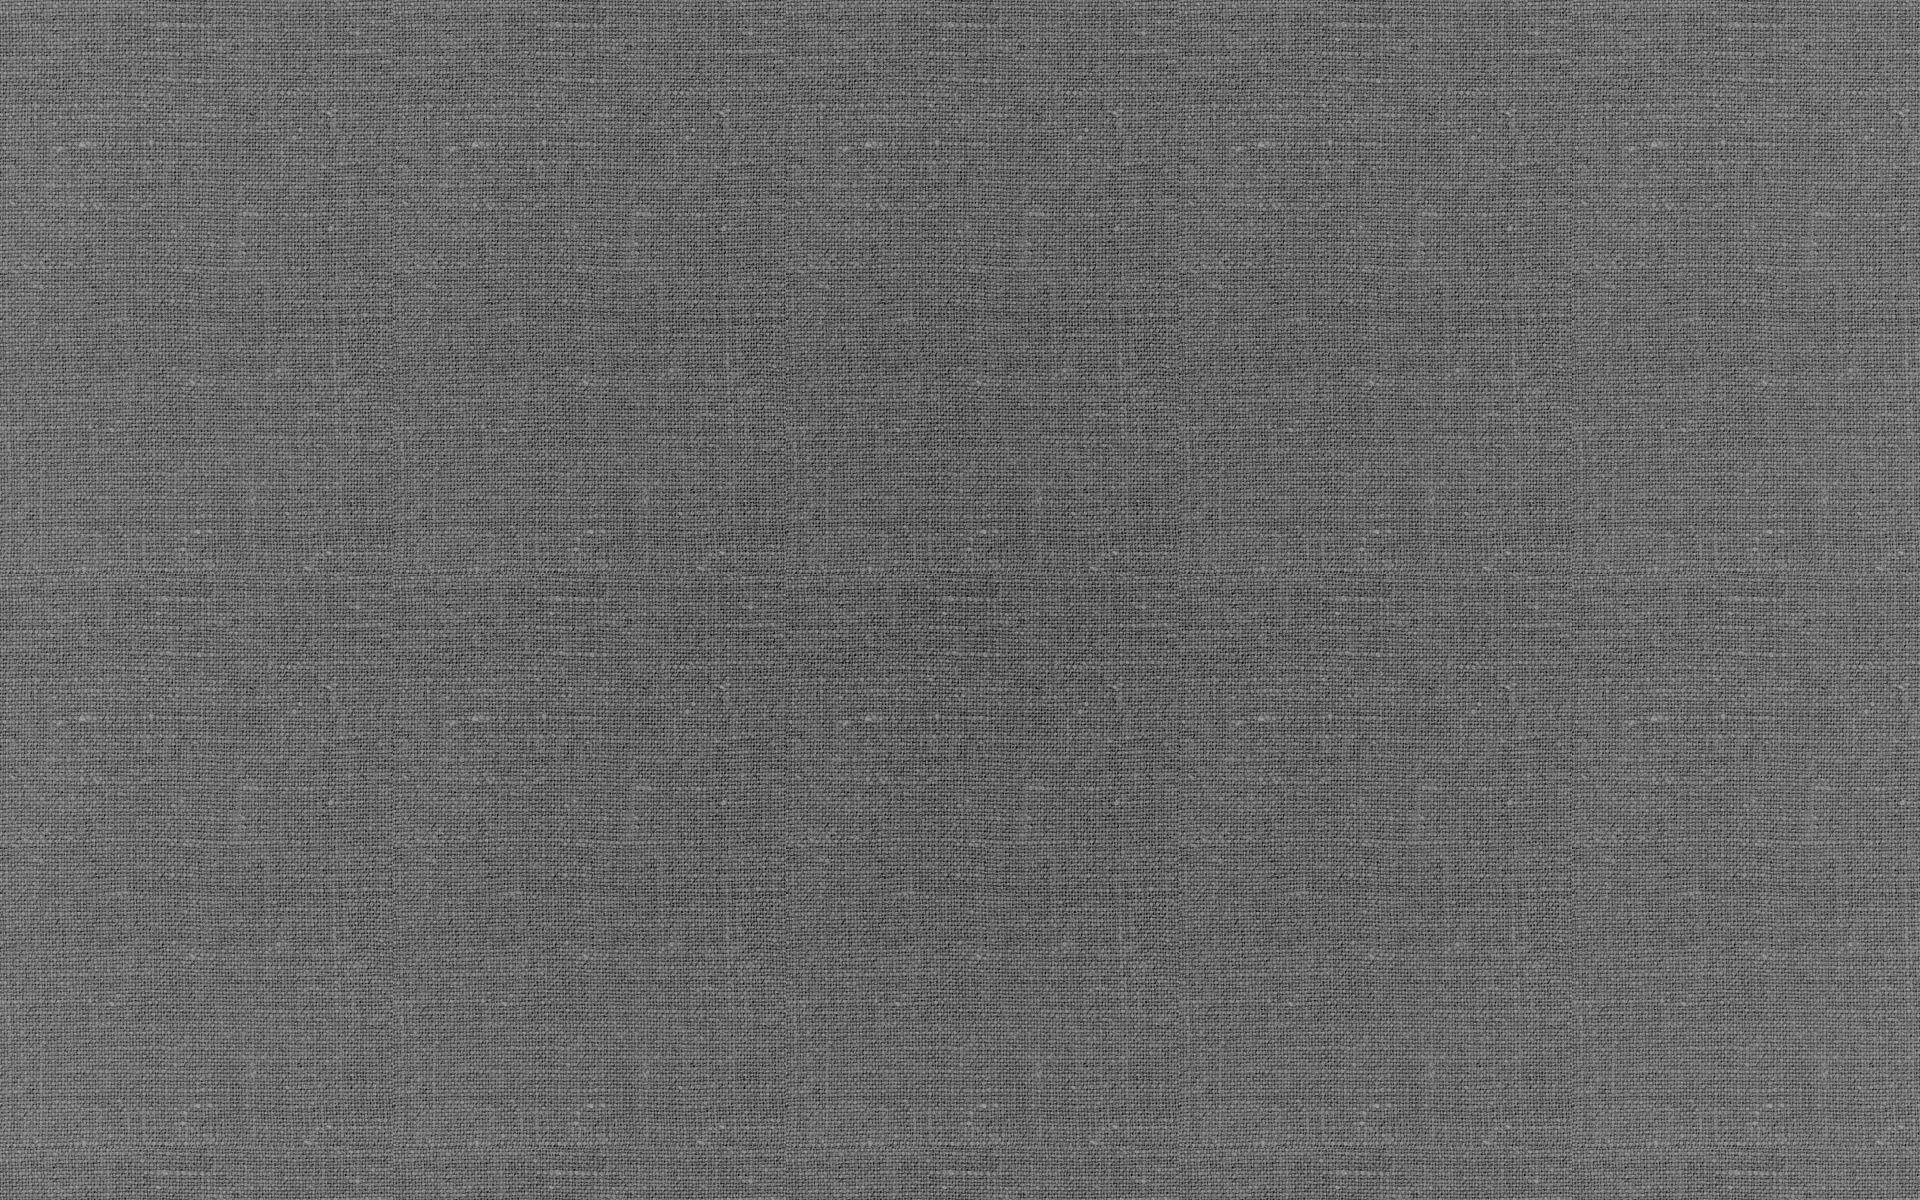 grey, grid, textures, texture, lines, surface